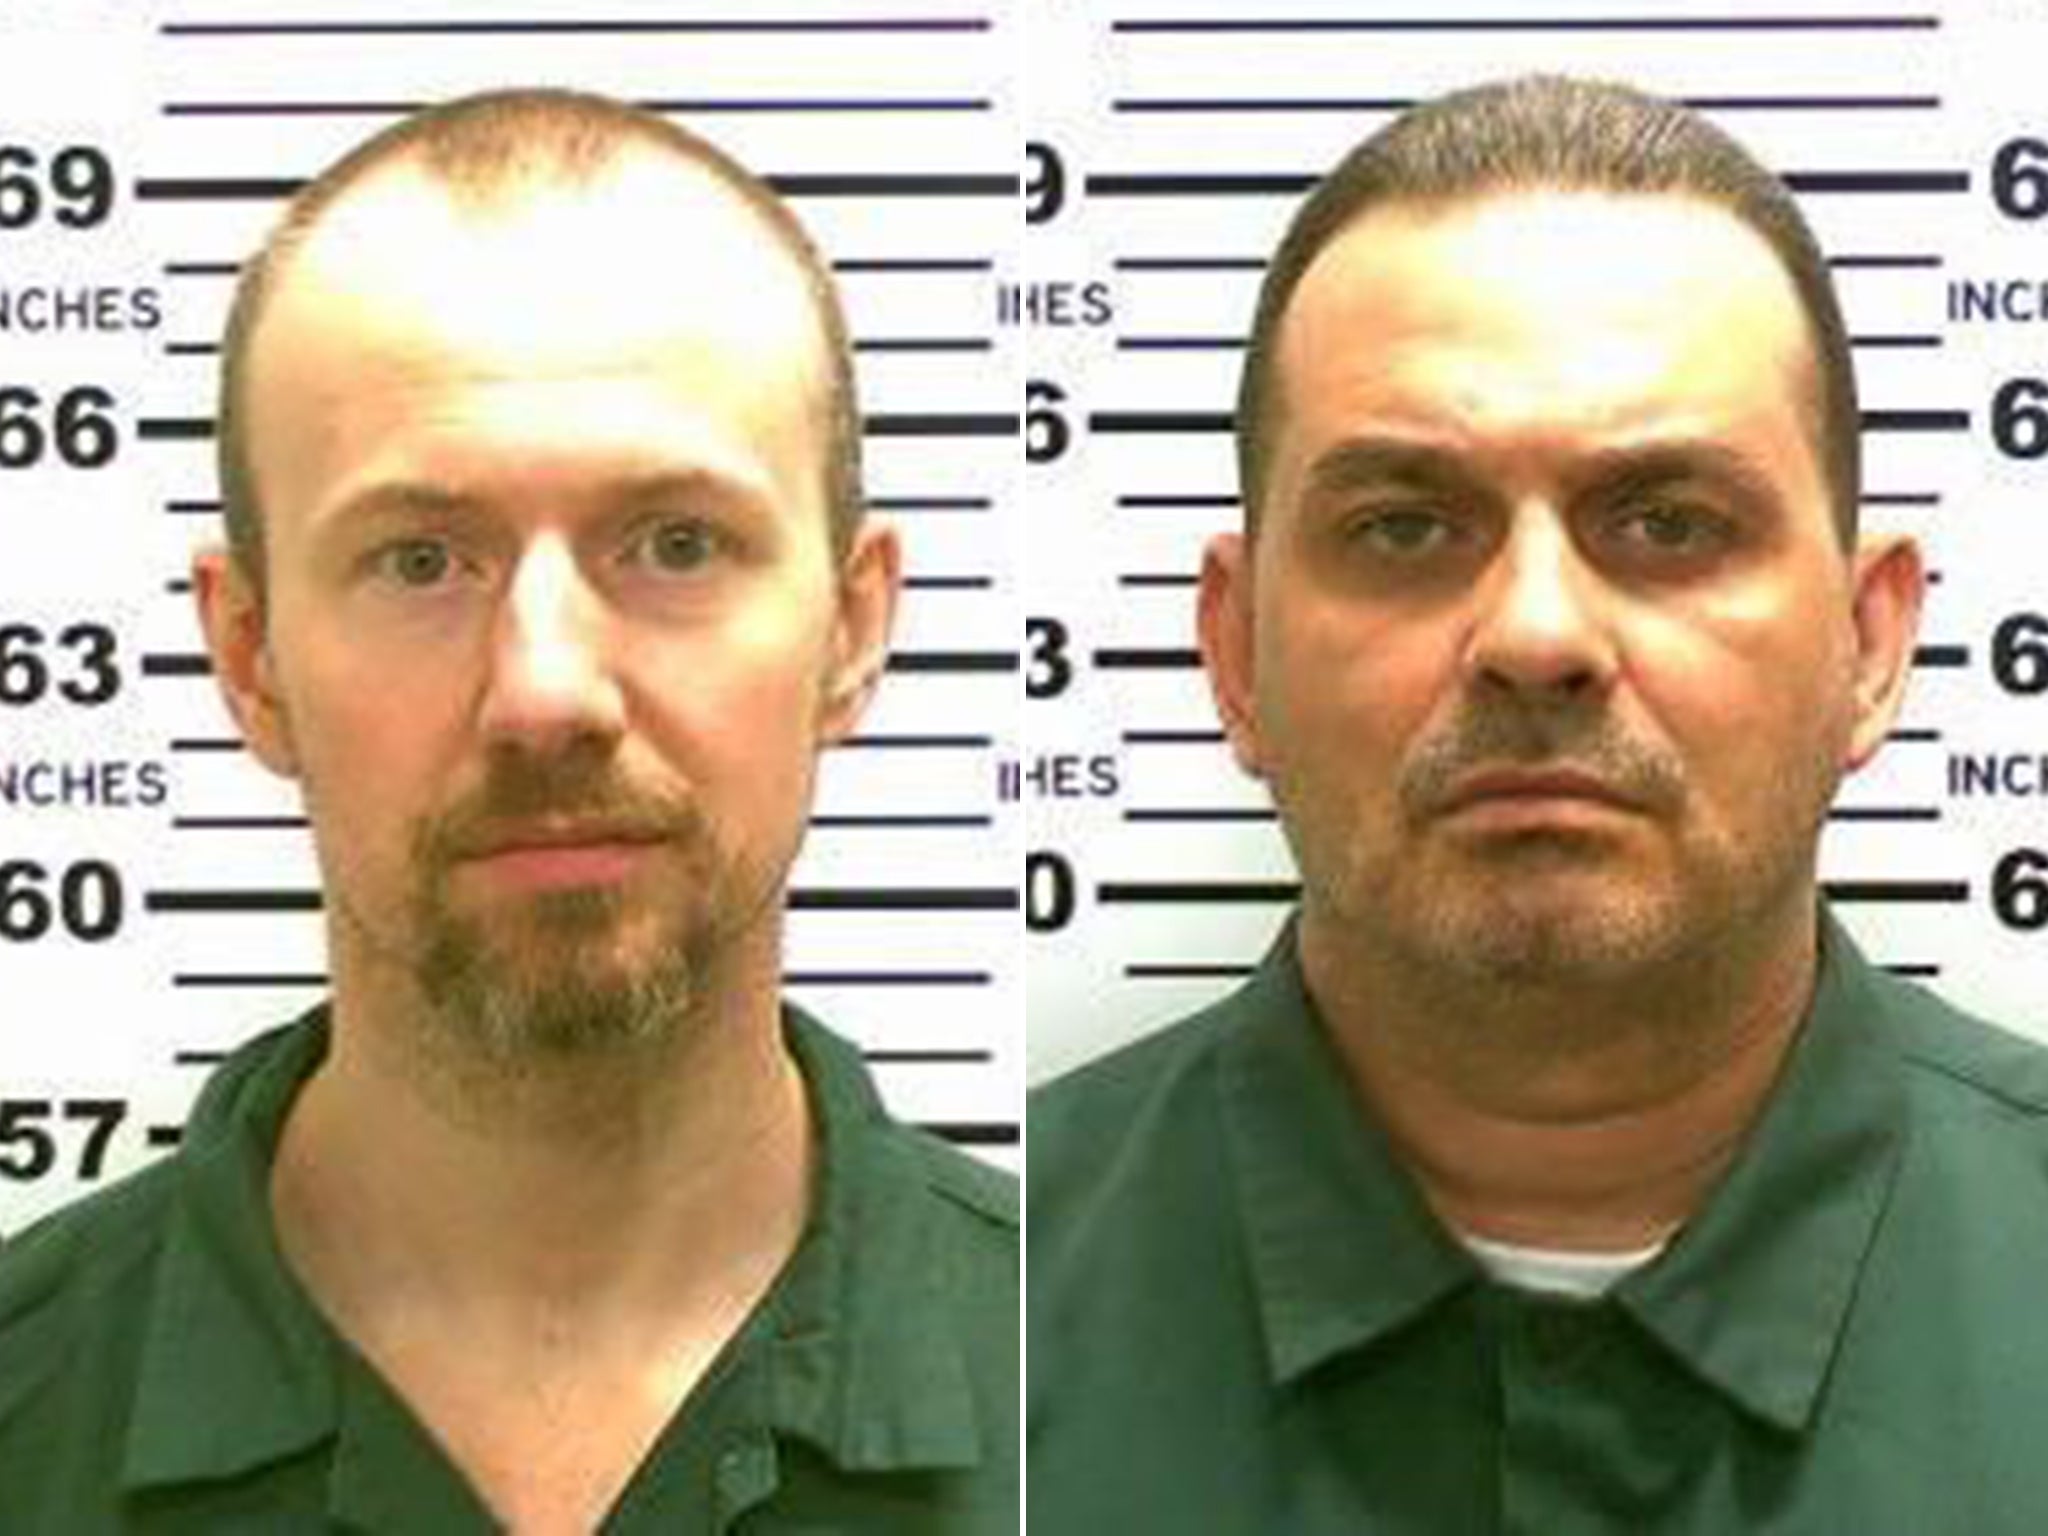 David Sweat, left, and Richard Matt, both convicted murderers, escaped from the Clinton Correctional Facility in Dannemora, New York